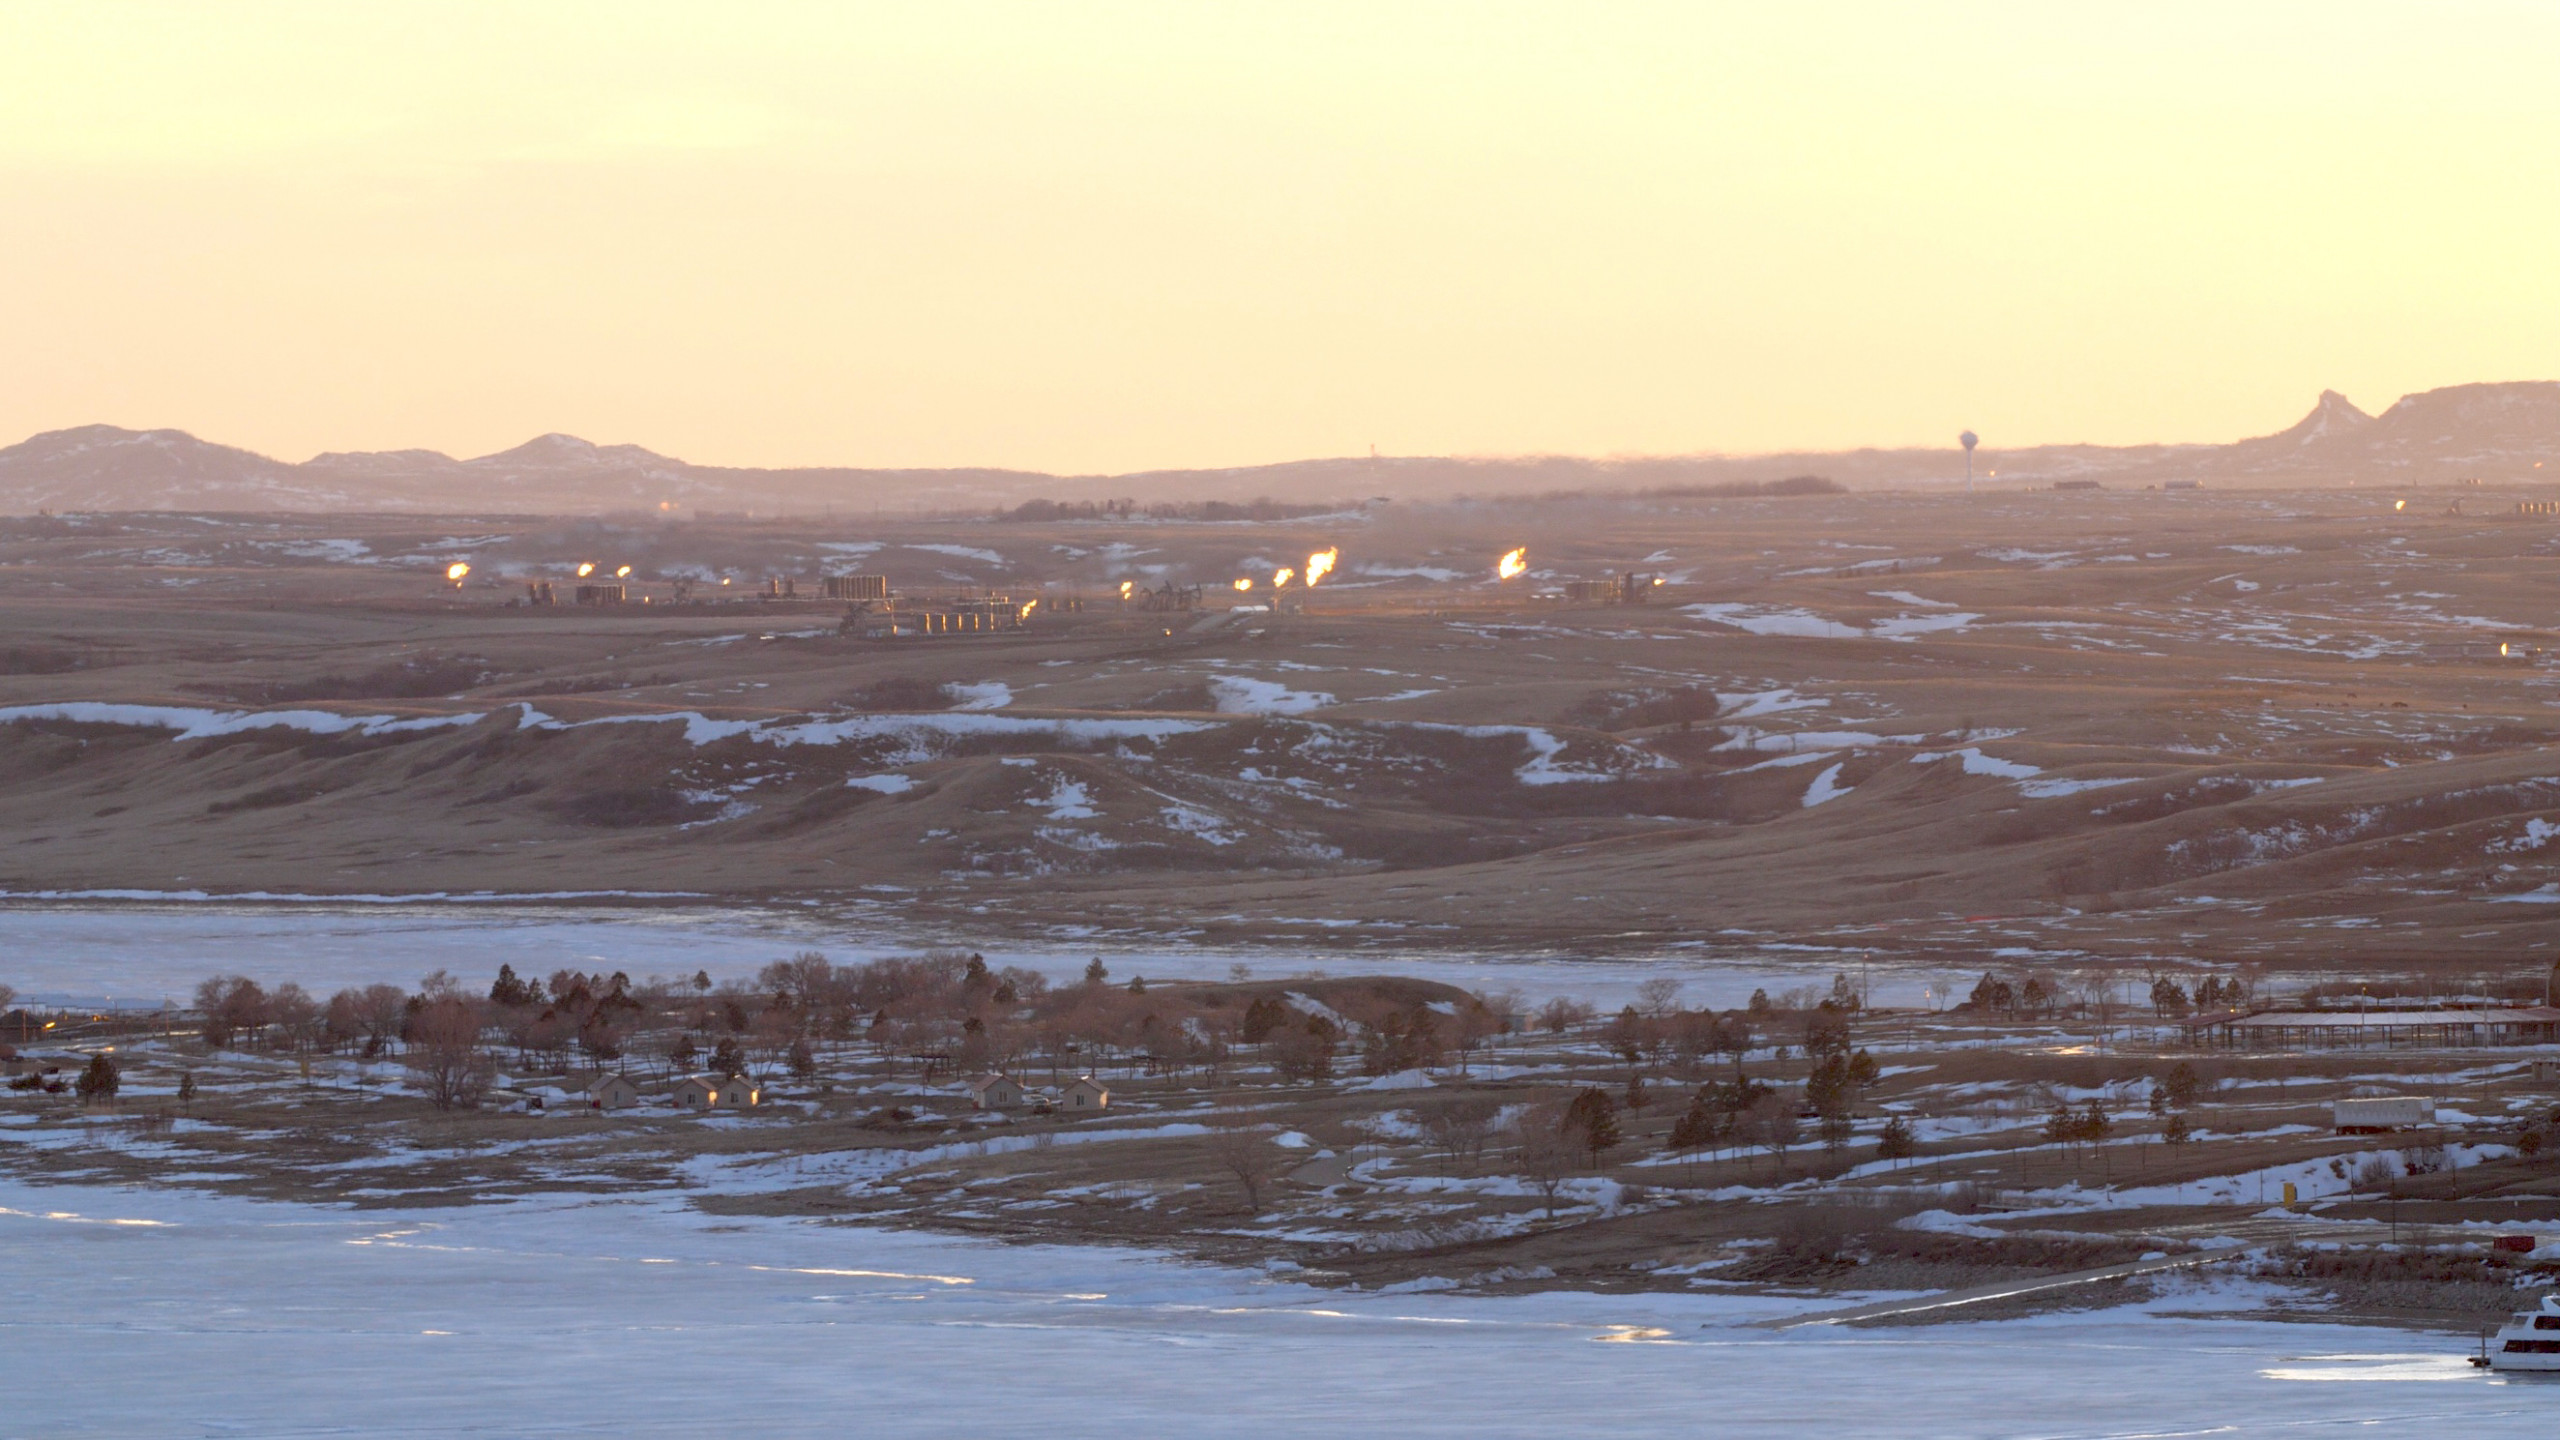 Natural gas flaring on the lands of the Mandan, Hidatsa and Arikara Nations. As seen from the bluffs overlooking the Missouri River across from Four Bears Village, MHA Nation, March 2019.  Photo: Angela Anderson